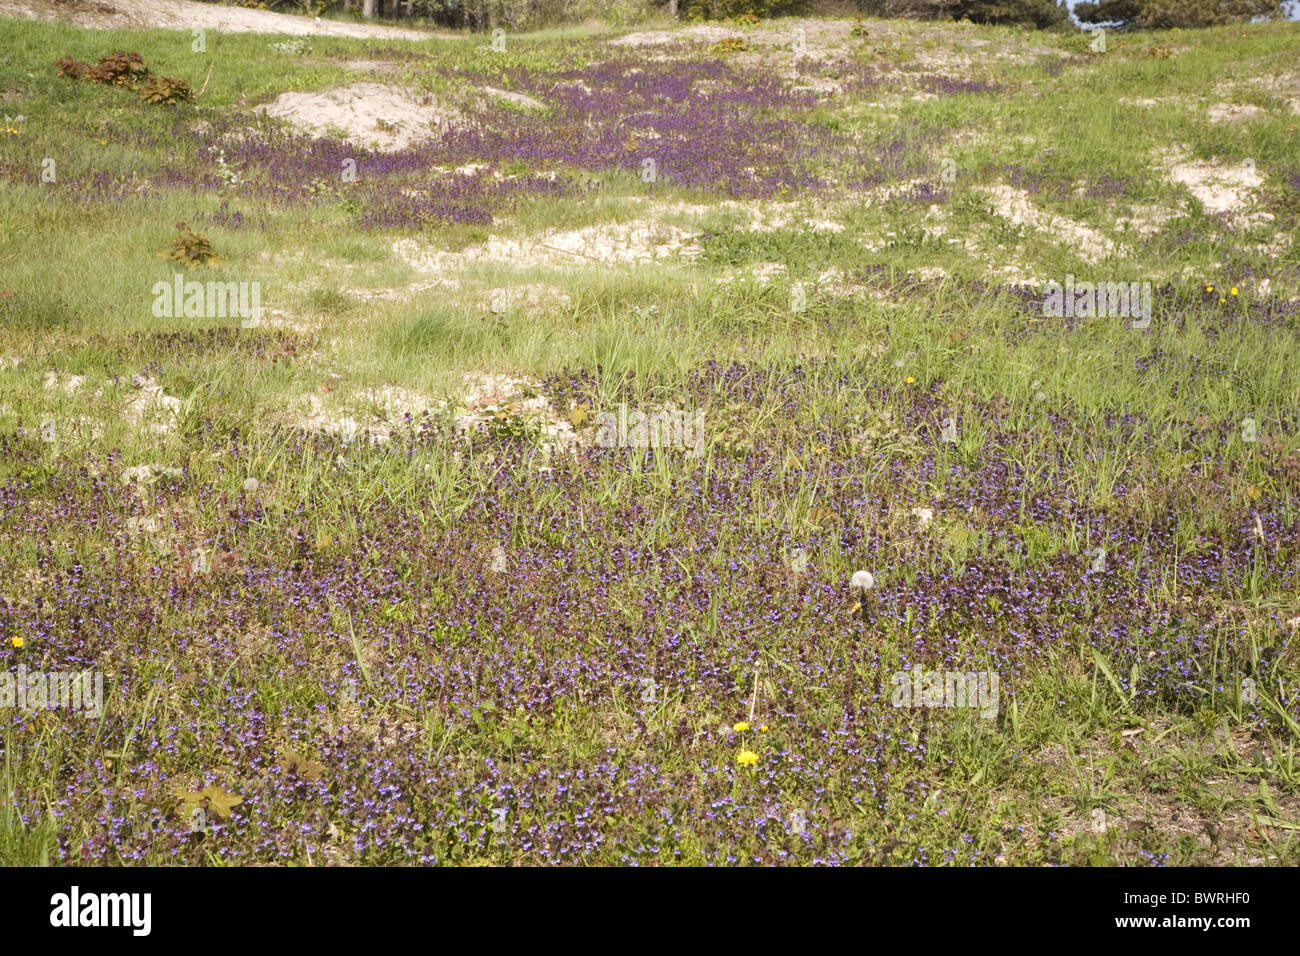 Vegetation with numerous flowers of Ground-ivy (Glechoma hederacea) in the dunes of Burgh-Haamstede, Netherlands Stock Photo